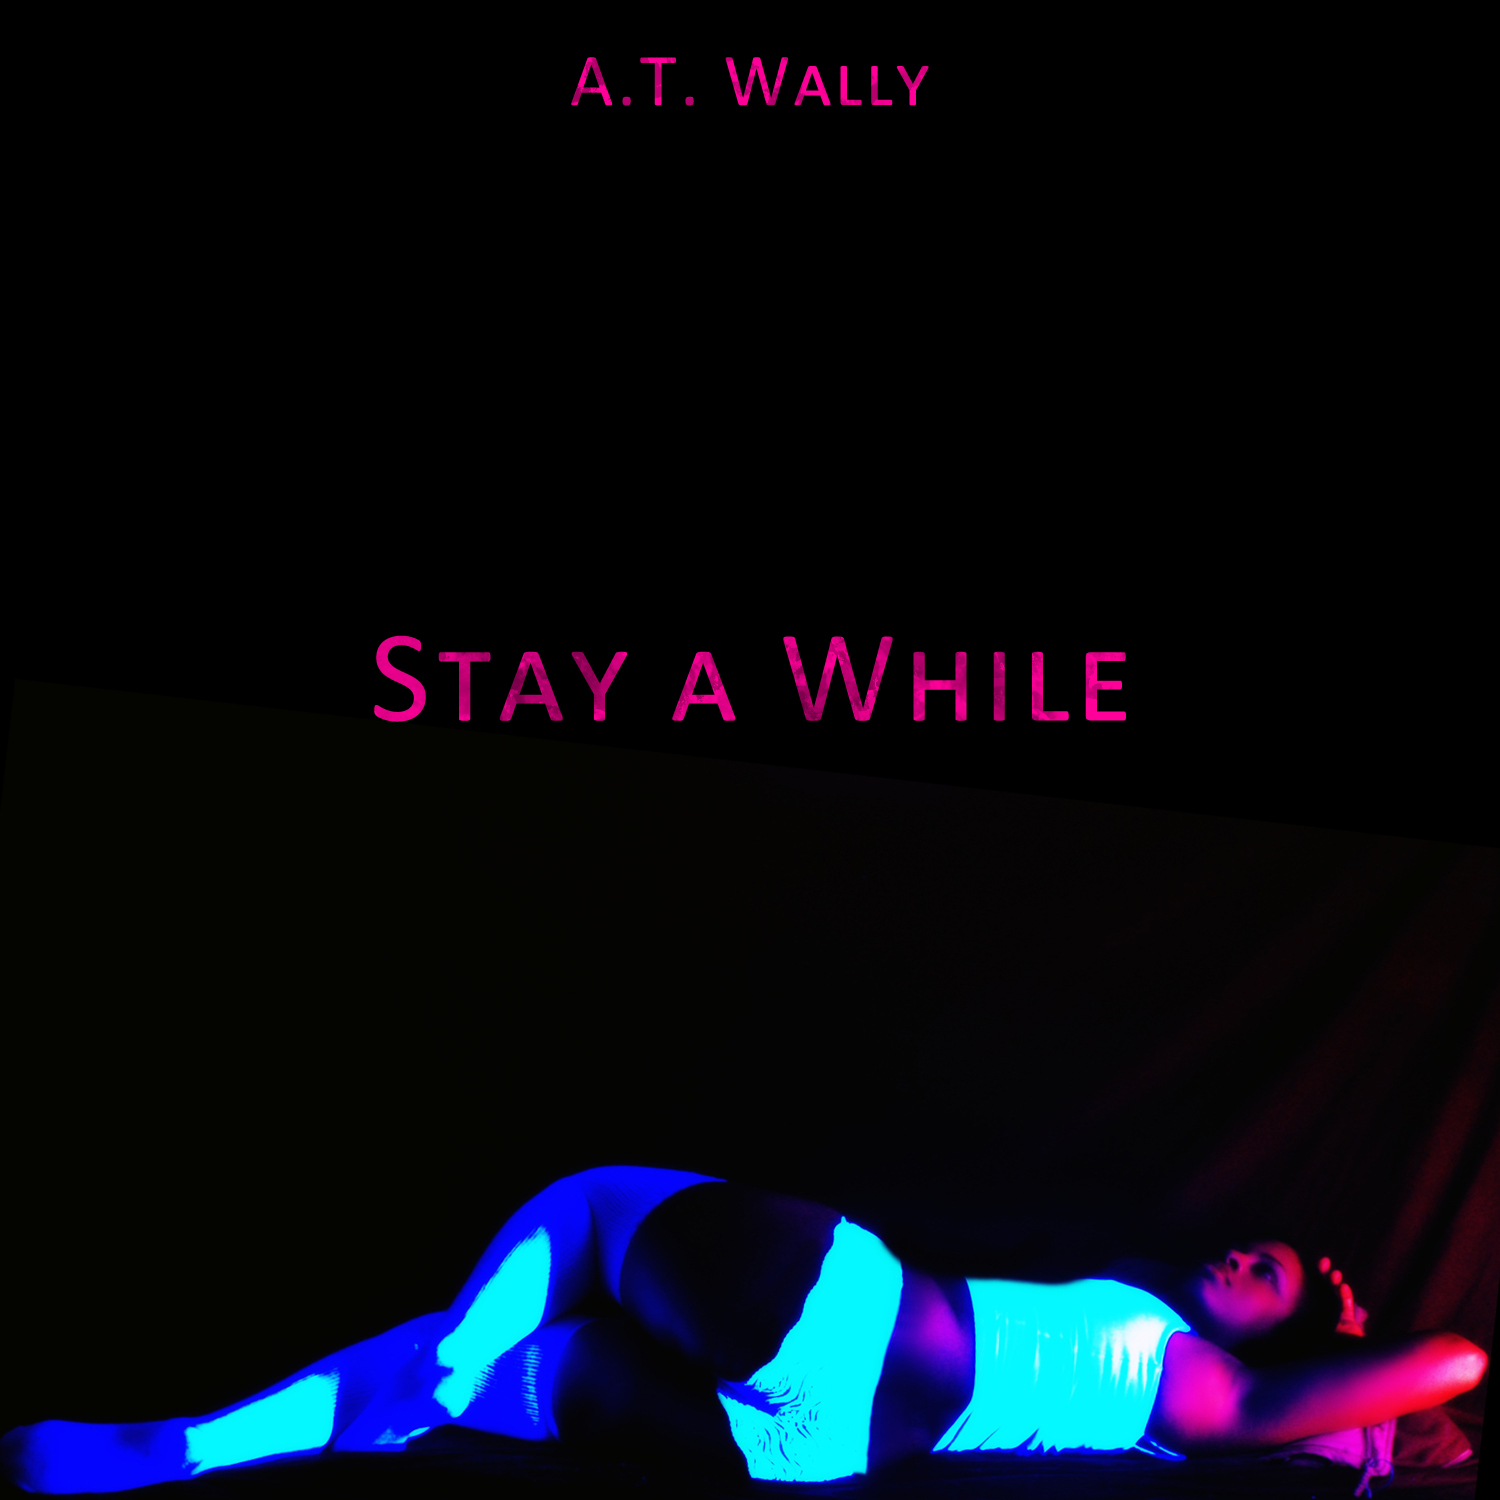 A.T. Wally – “Stay A While”